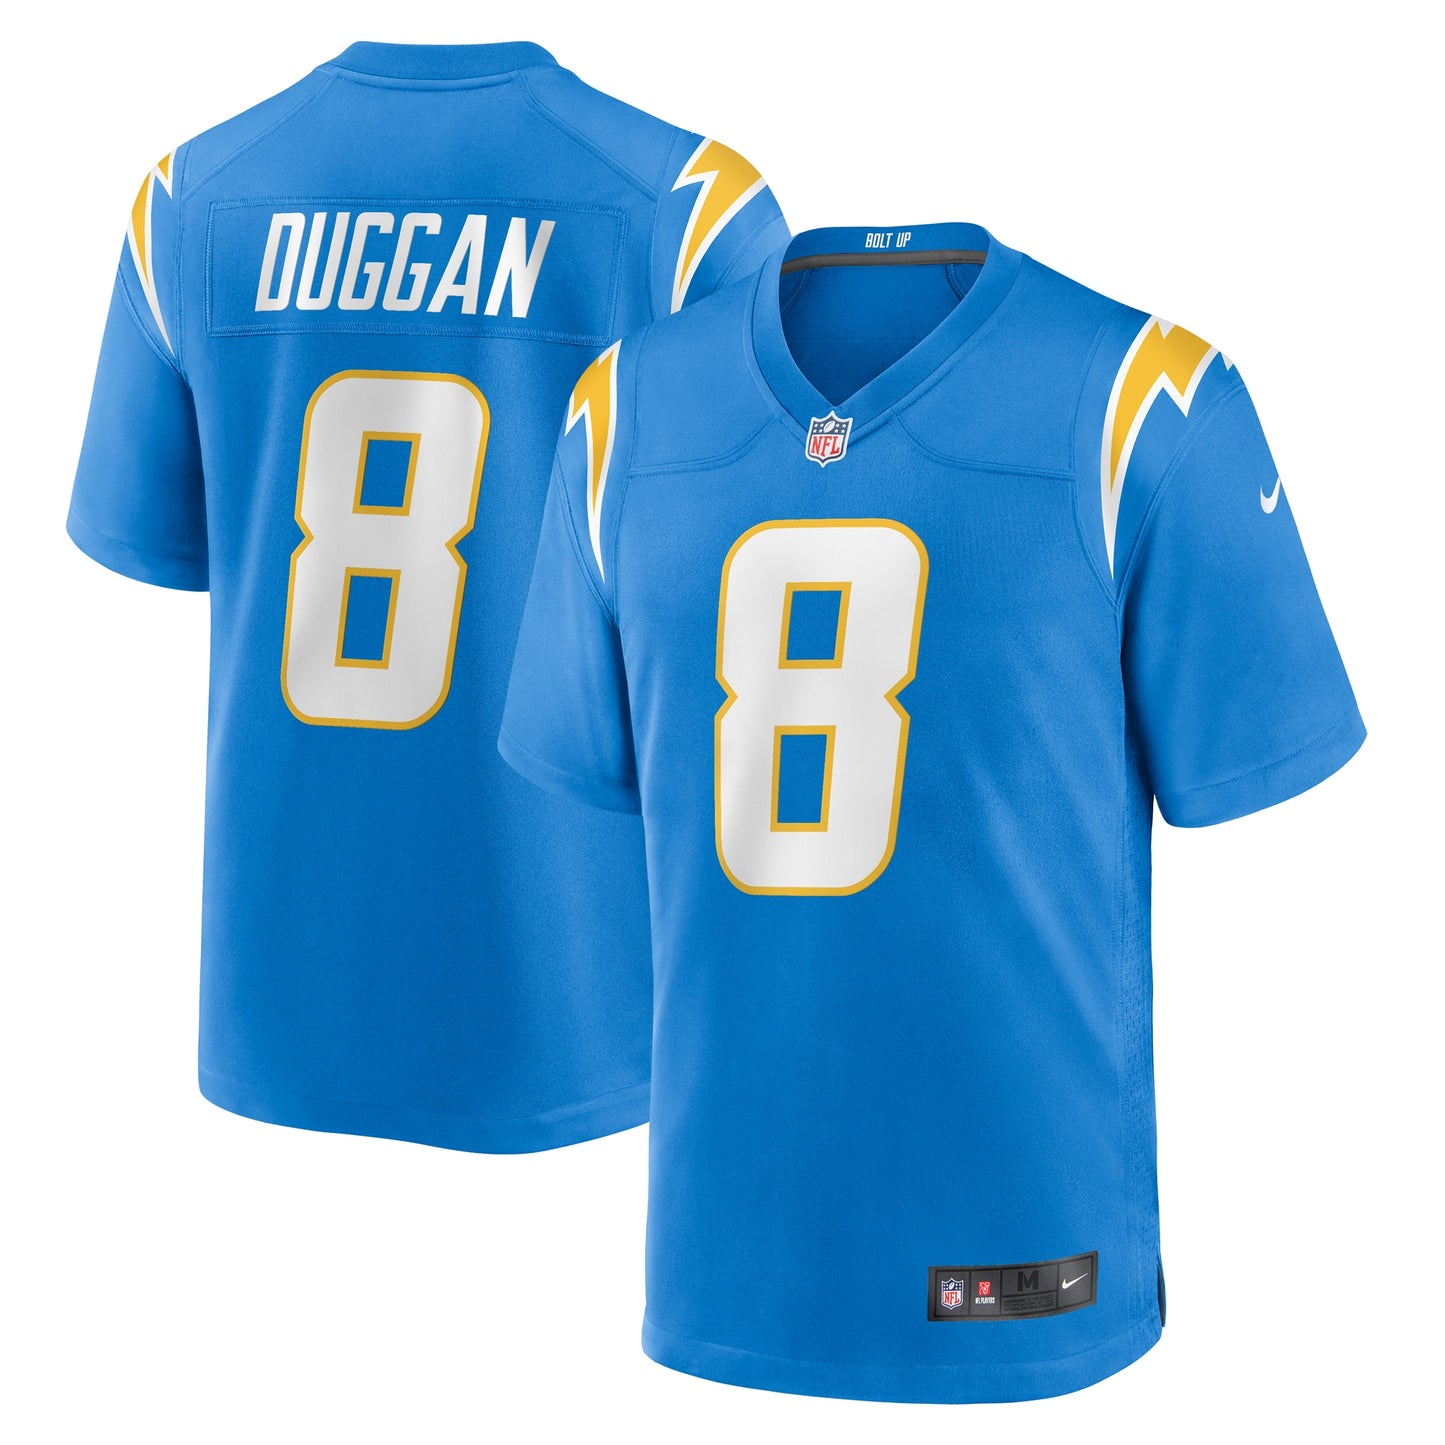 Max Duggan Los Angeles Chargers Nike Team Game Jersey - Powder Blue